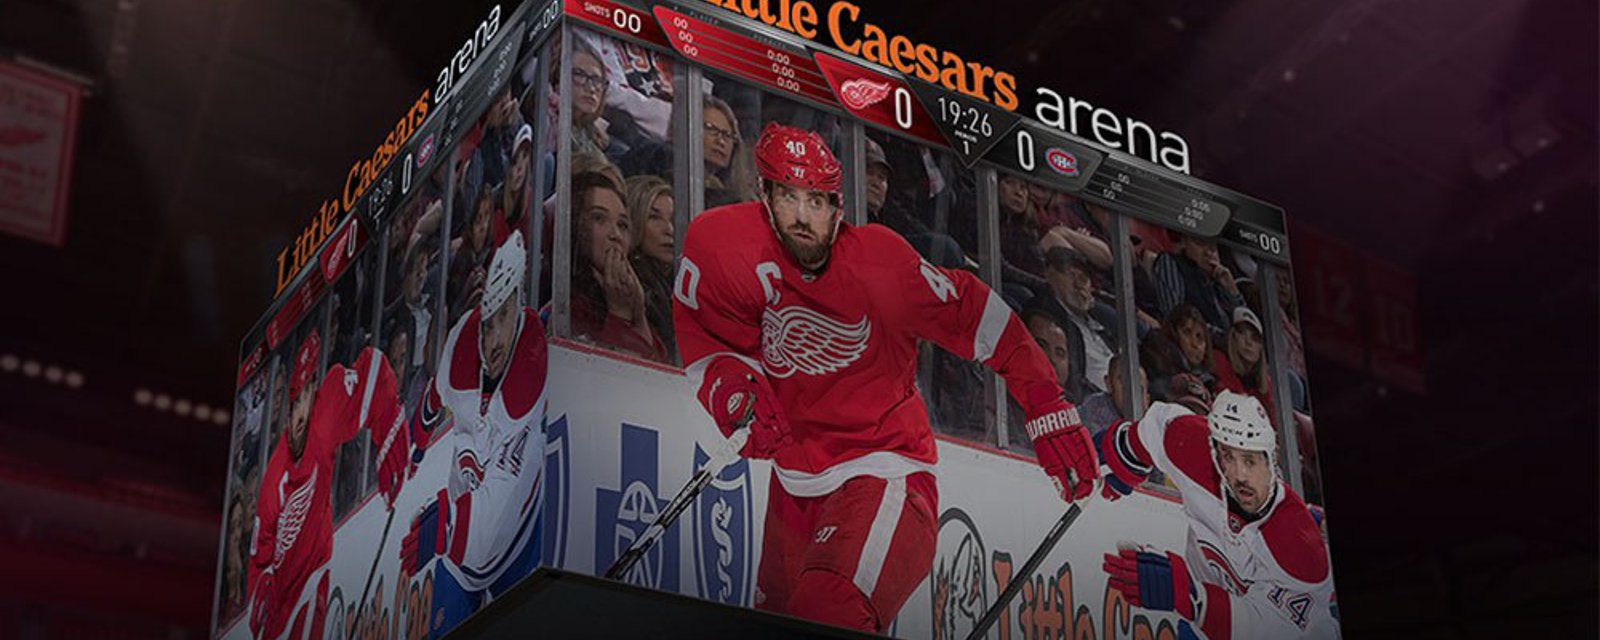 Red Wings unveil the world’s largest scoreboard of its kind